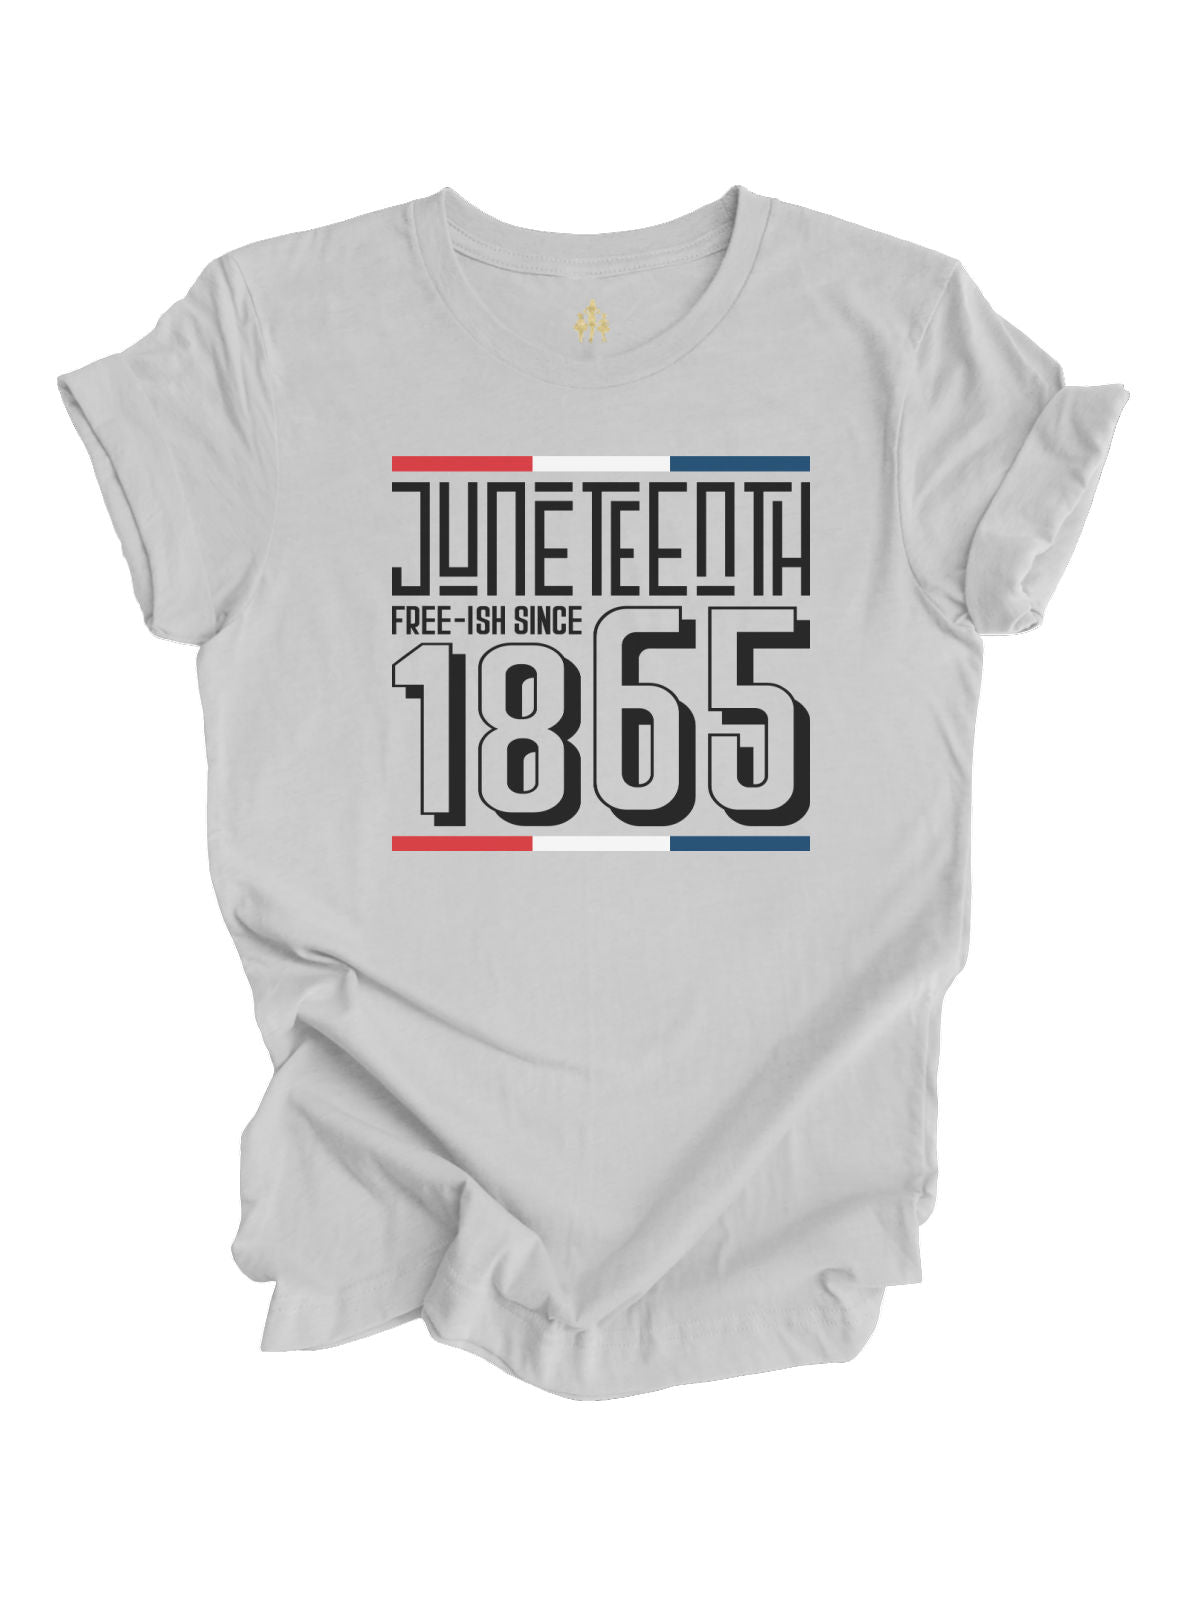 Juneteenth Free-ish Since 1865 Adult Shirt in Gray